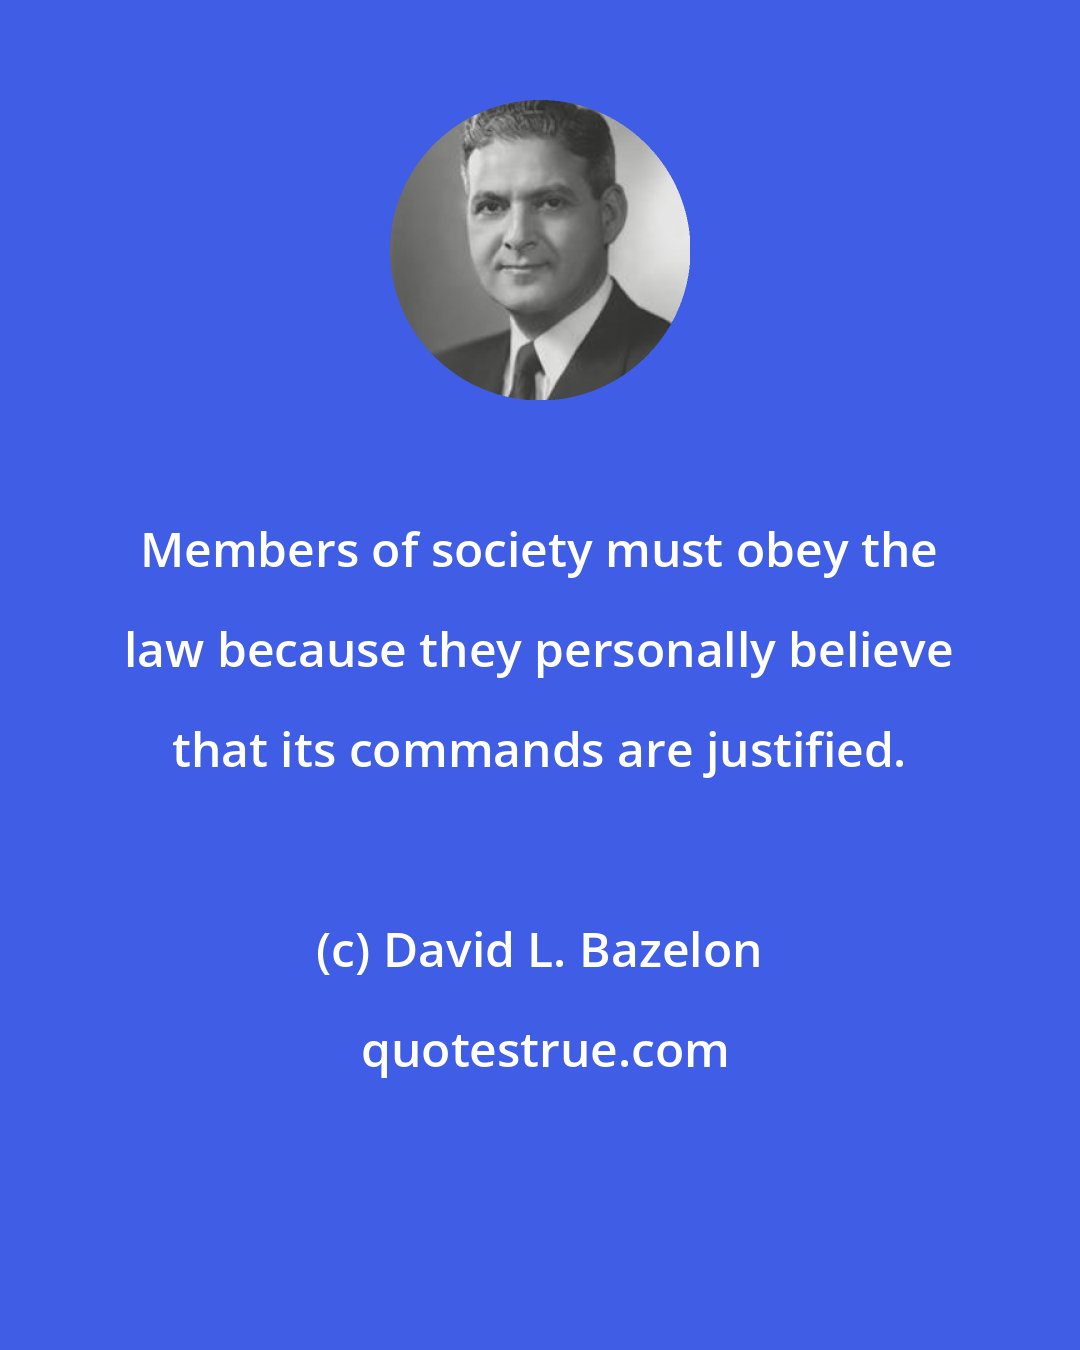 David L. Bazelon: Members of society must obey the law because they personally believe that its commands are justified.